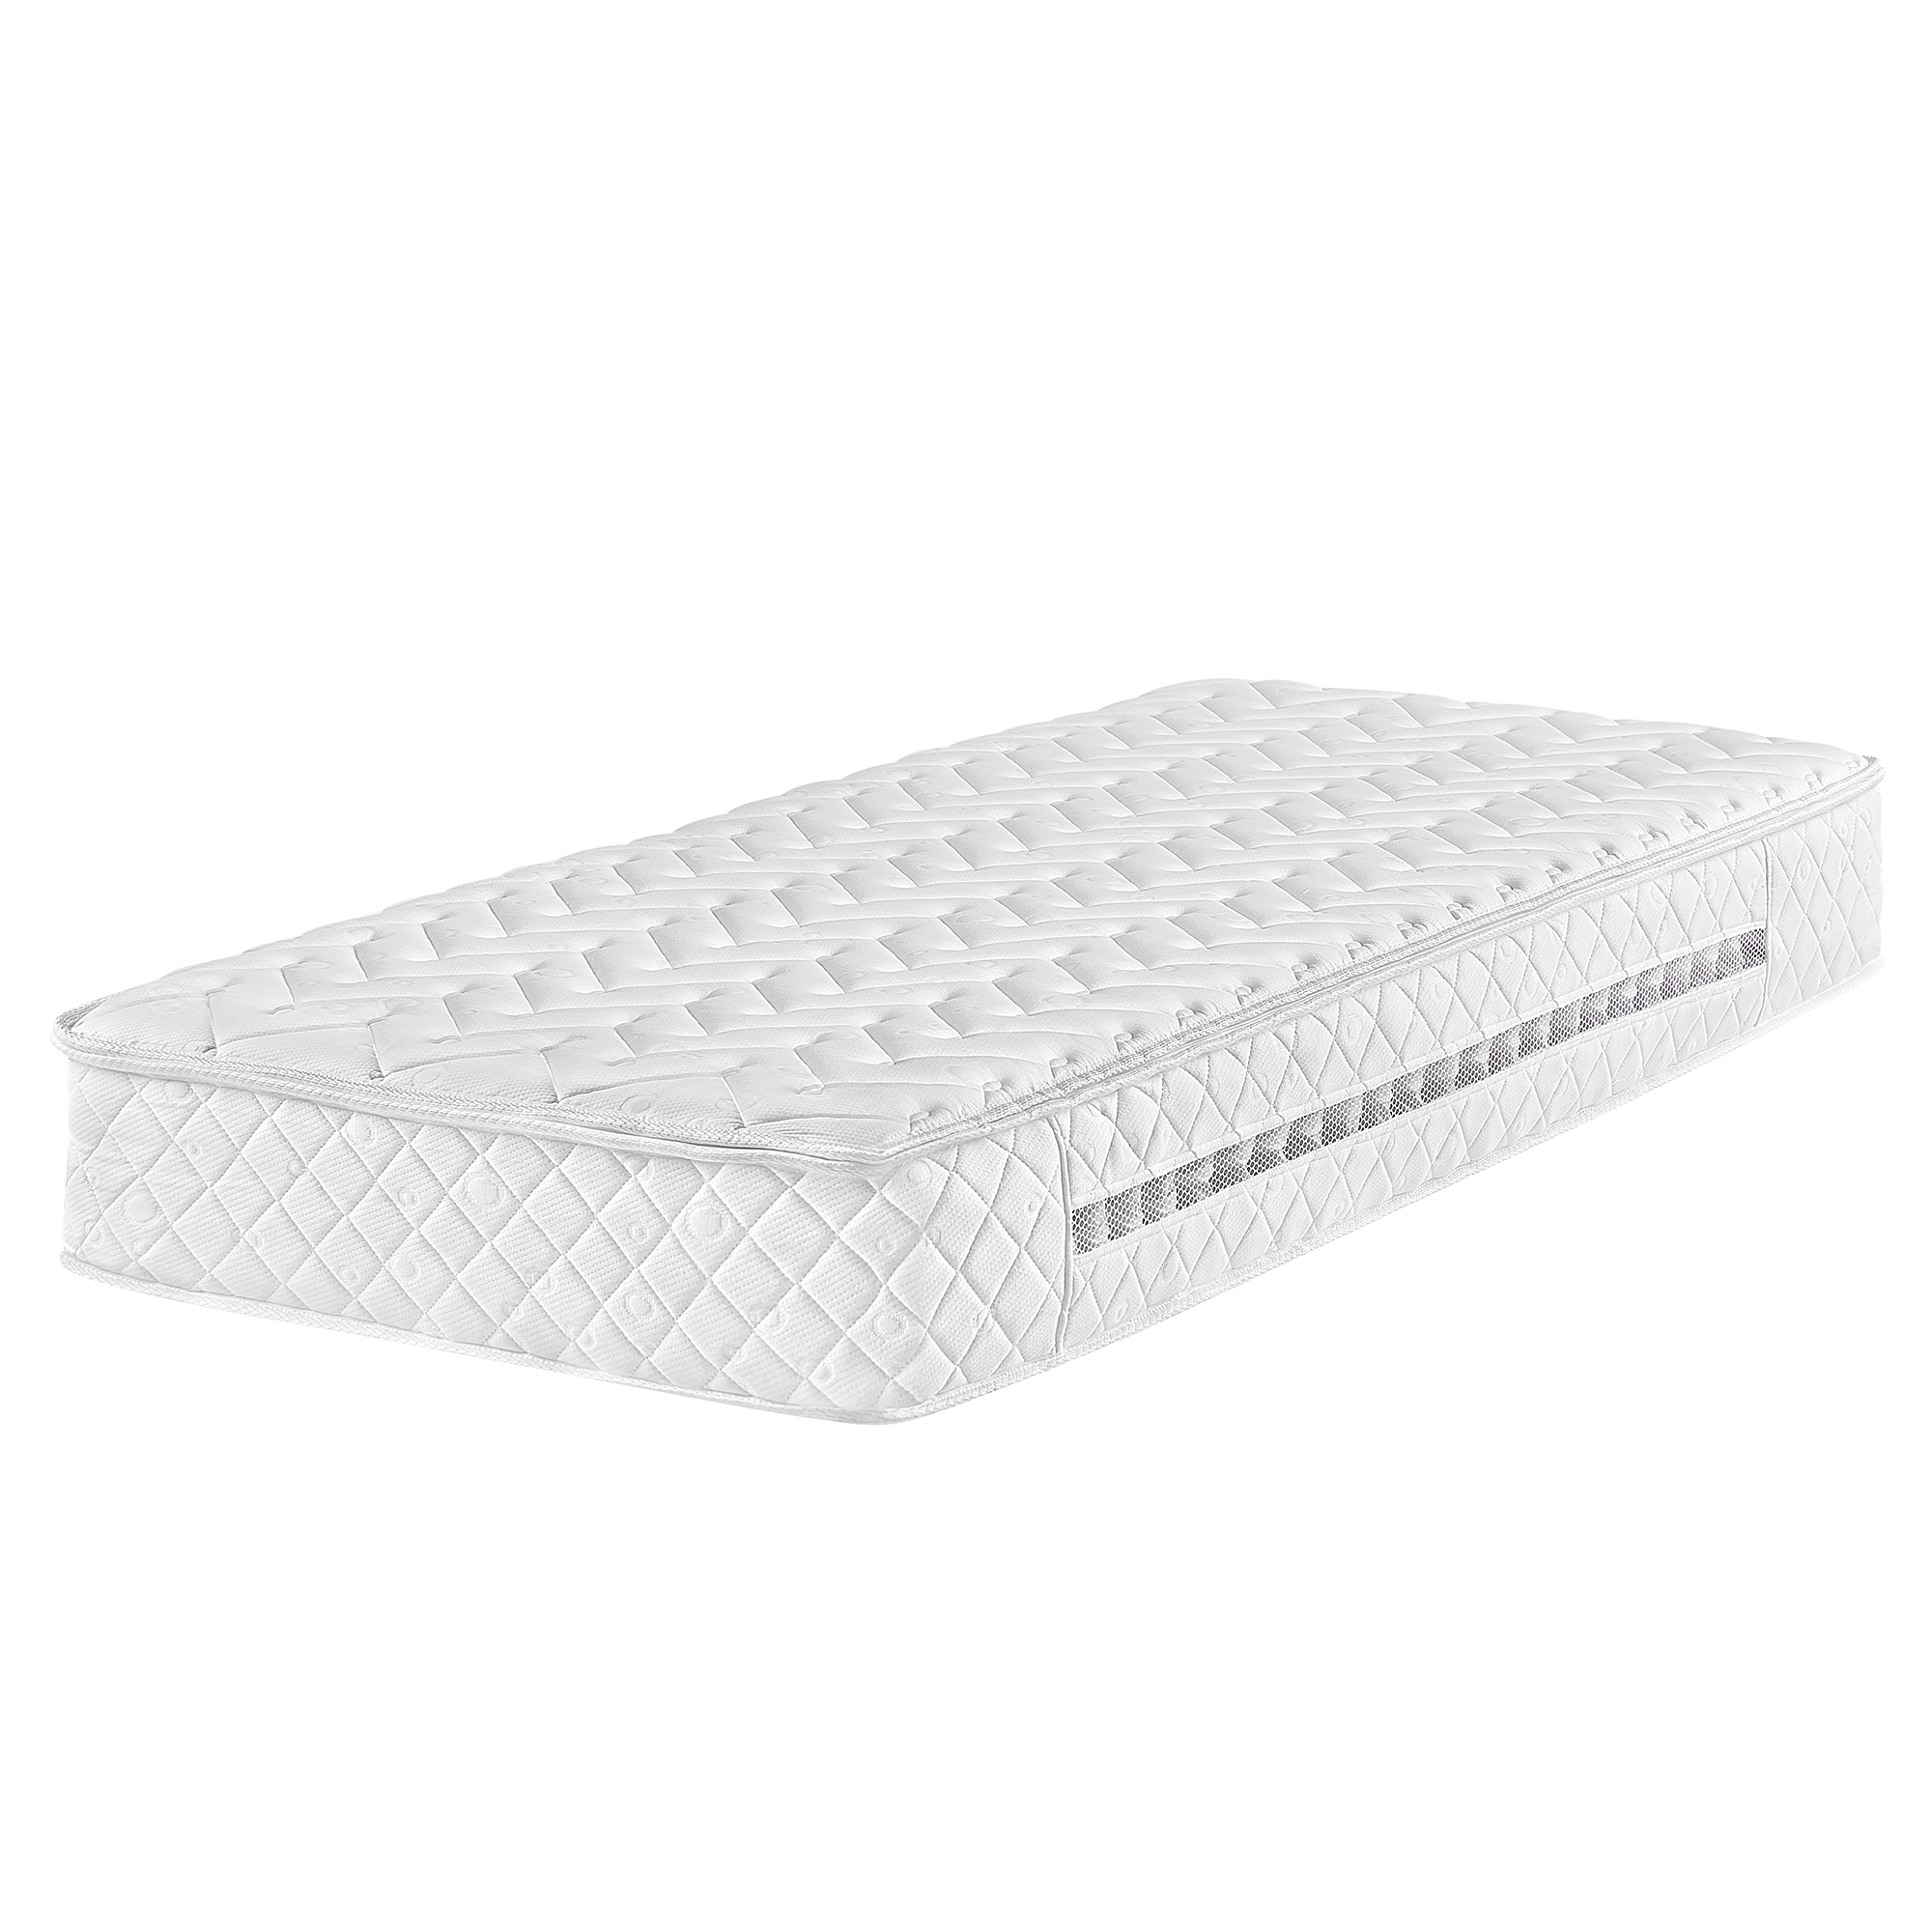 Beliani Pocket Spring Mattress Firm White 90 x 200 cm Polyester with Cooling Memory Foam with Zip